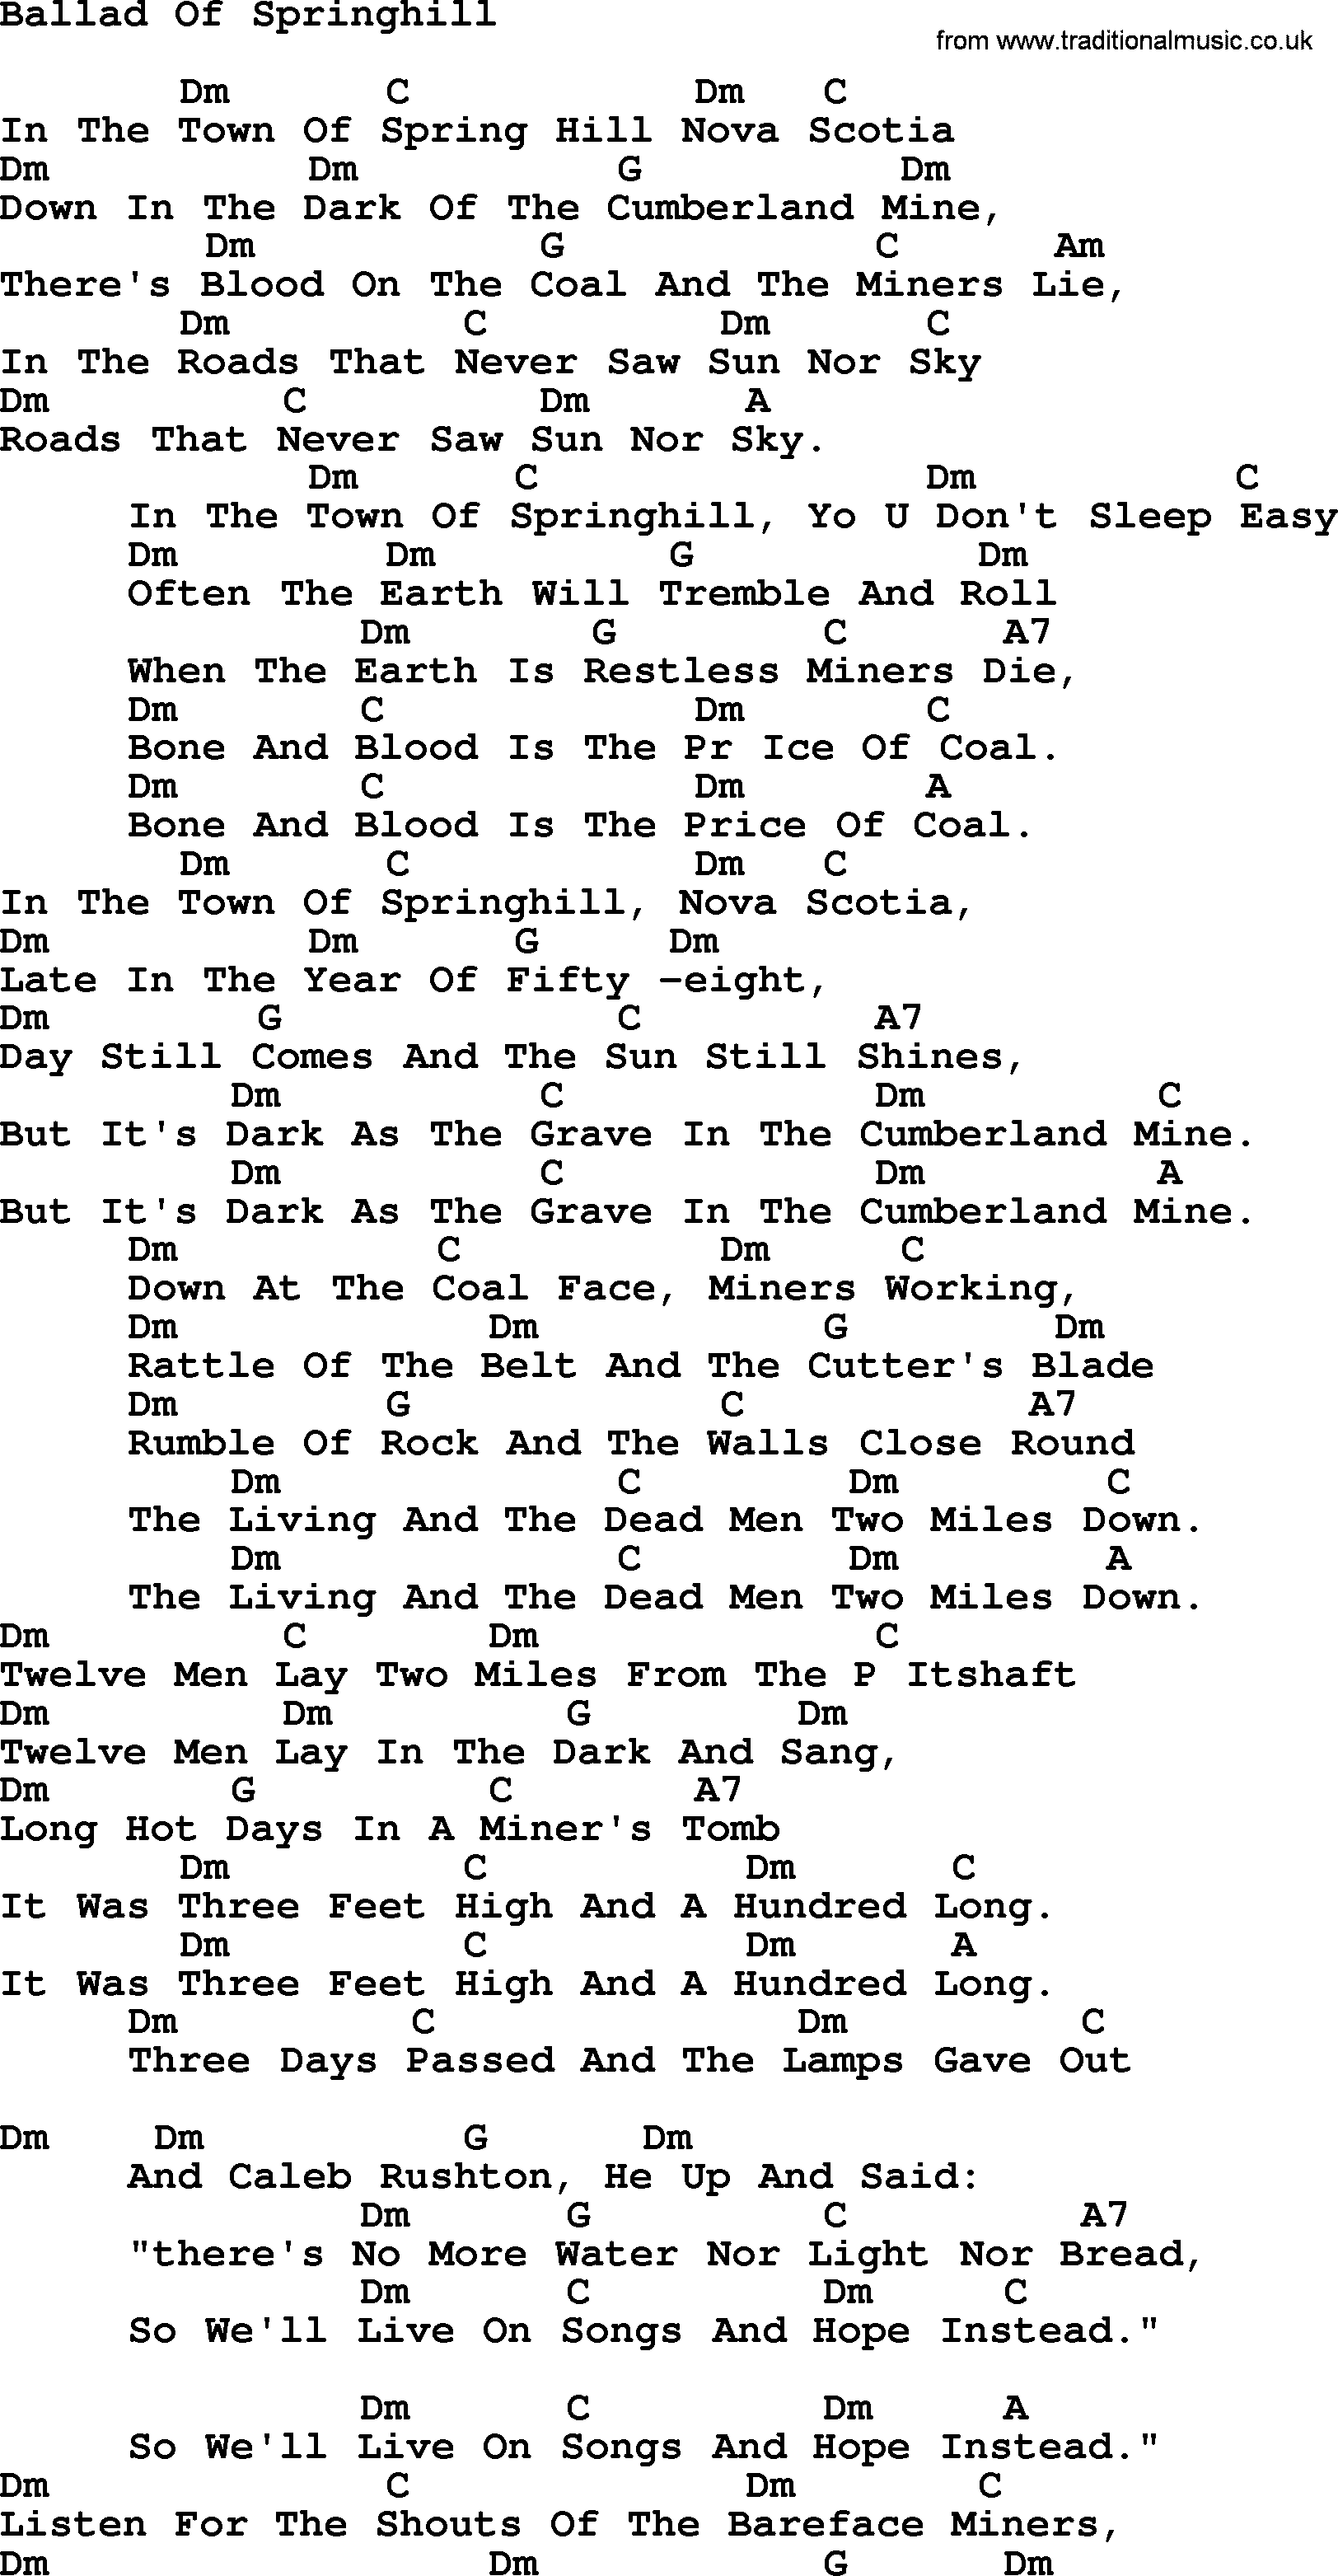 Peter, Paul and Mary song Ballad Of Springhill, lyrics and chords